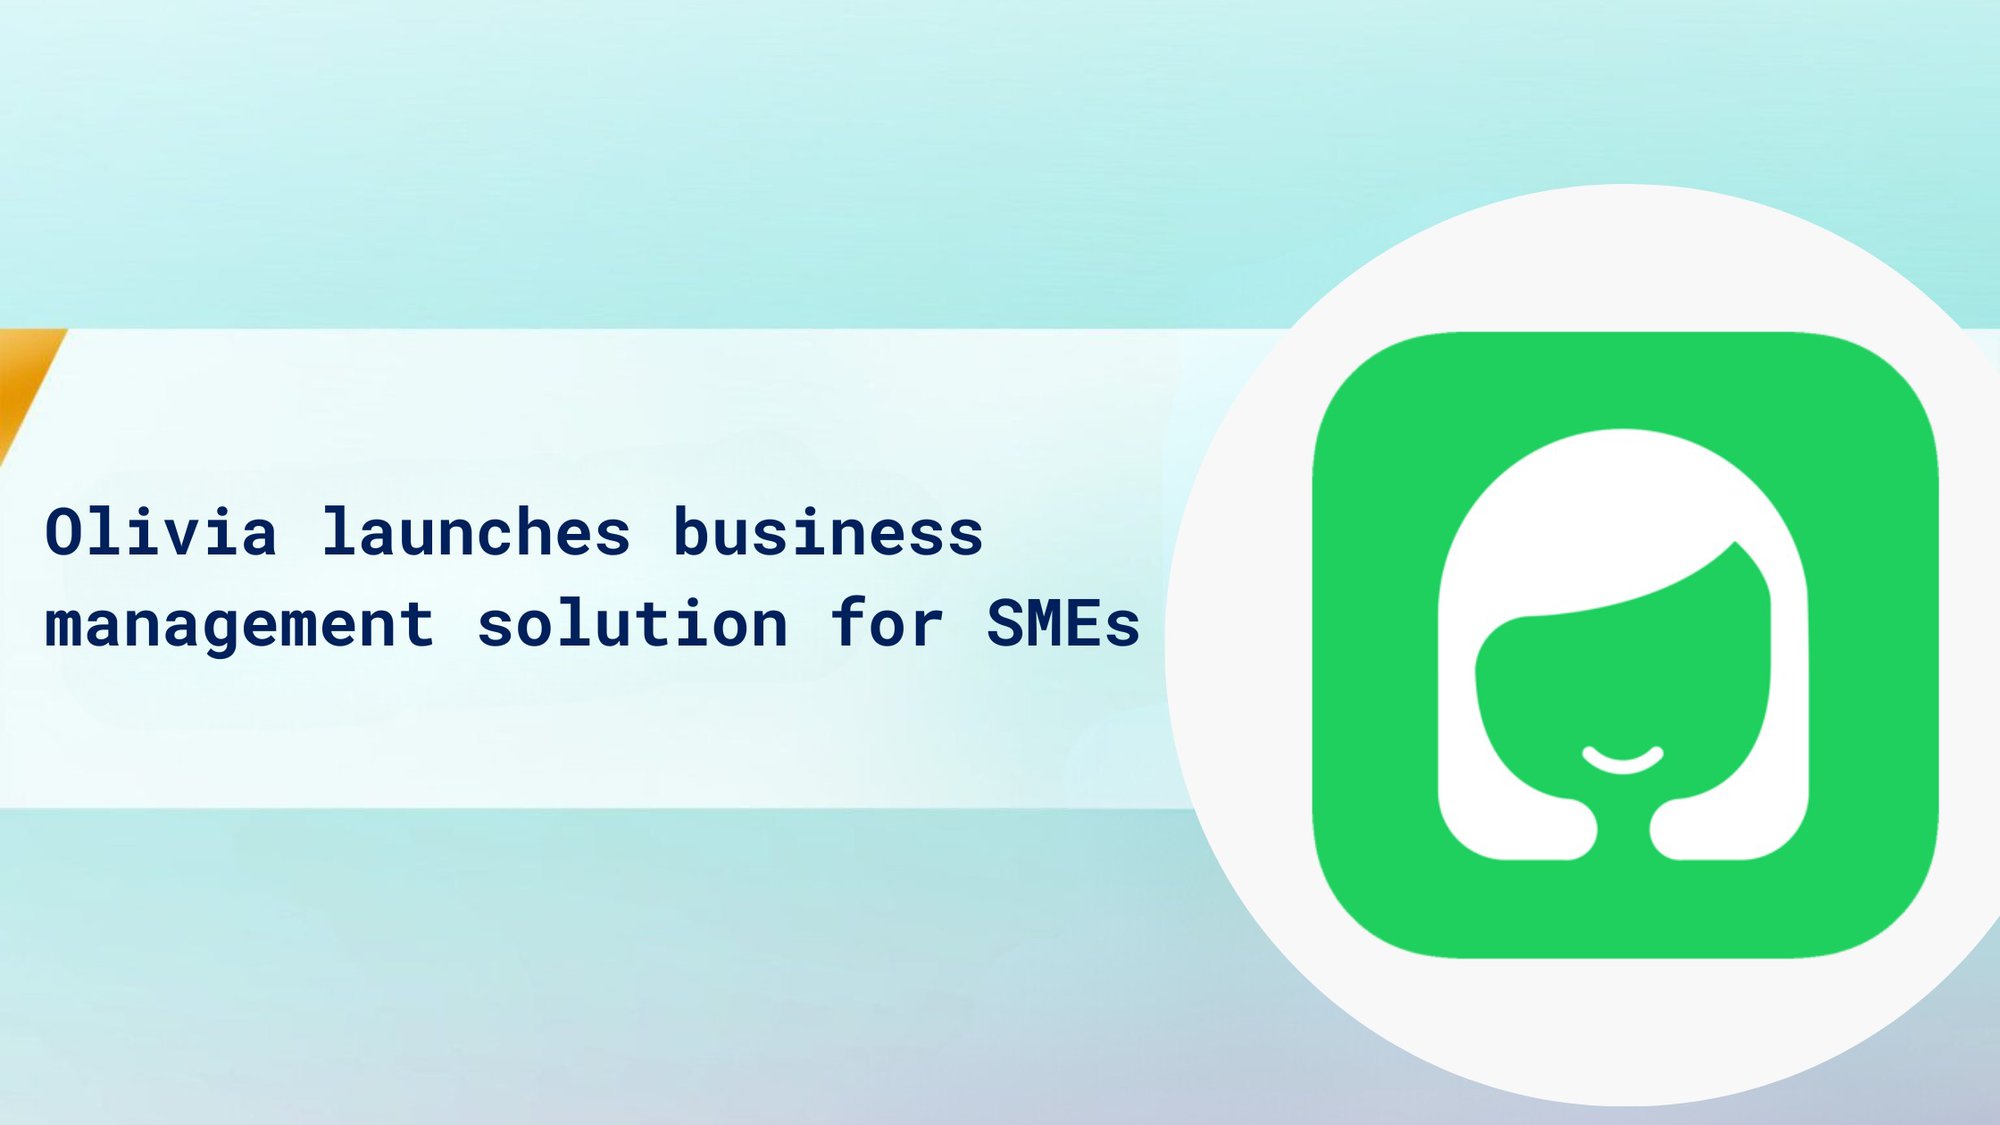 Olivia launches business management solution for SMEs